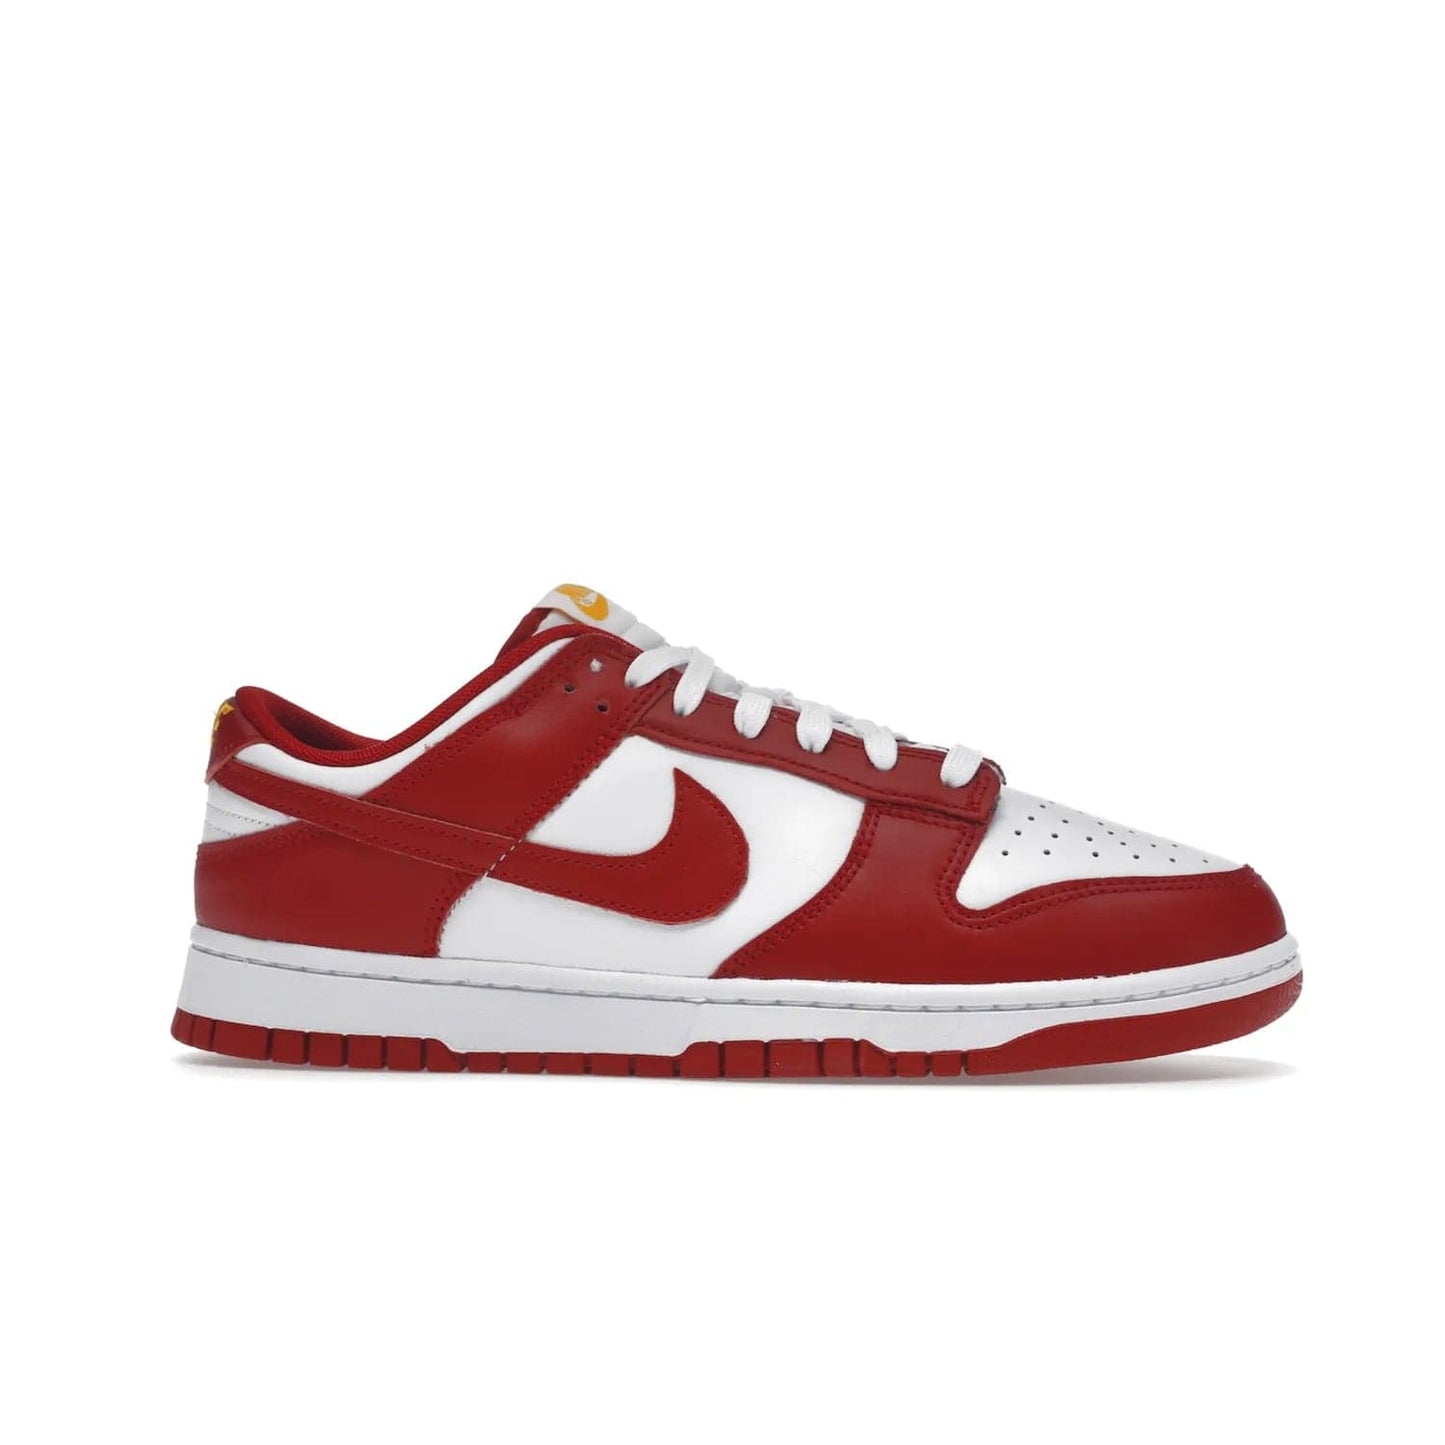 Nike Dunk Low USC - Image 2 - Only at www.BallersClubKickz.com - The Nike Dunk Low USC DD1391-602 colorway captures the eye of University of Southern California fans. Crafted with leather and rubber upper and outsole, this stylish sneaker features a white, gym red, and yellow colorway. With yellow Nike branding, white perforated vamp, and red suede Swoosh, this sneaker turns heads. Get the classic Nike Dunk Low USC releasing on November 9th, 2022.